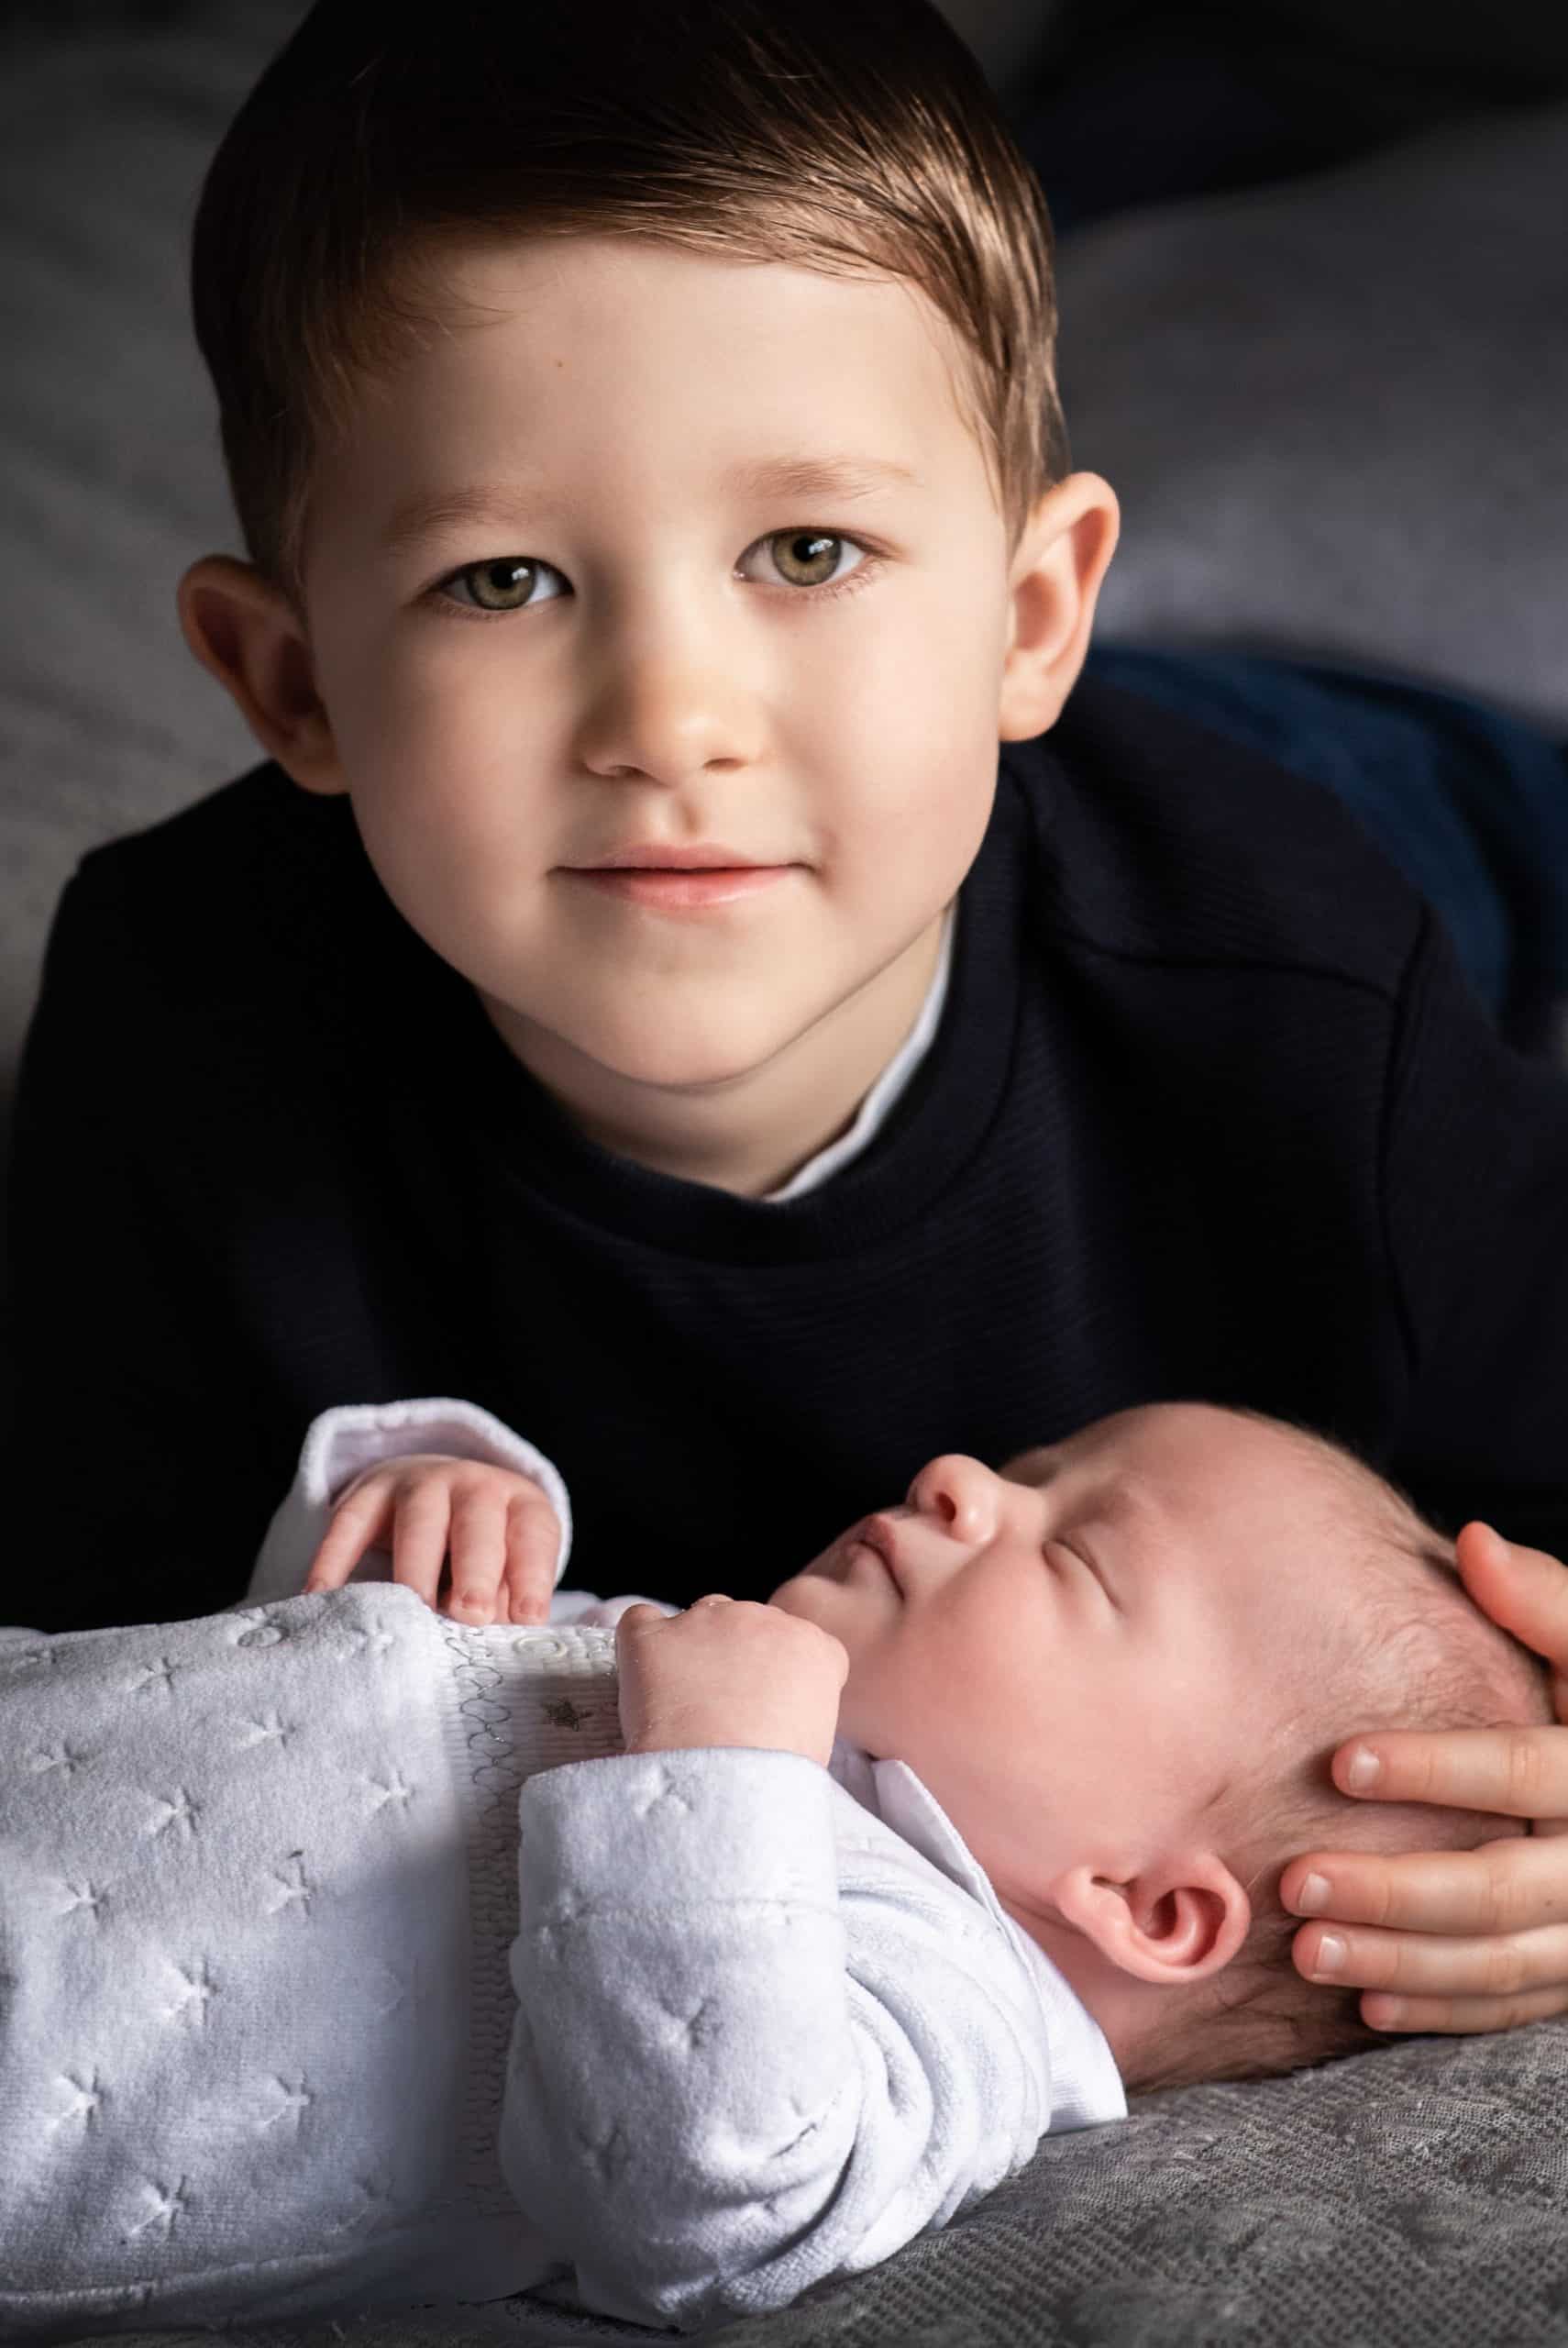 Brig brother have his portraits taken whilst cuddling his newborn baby brothers